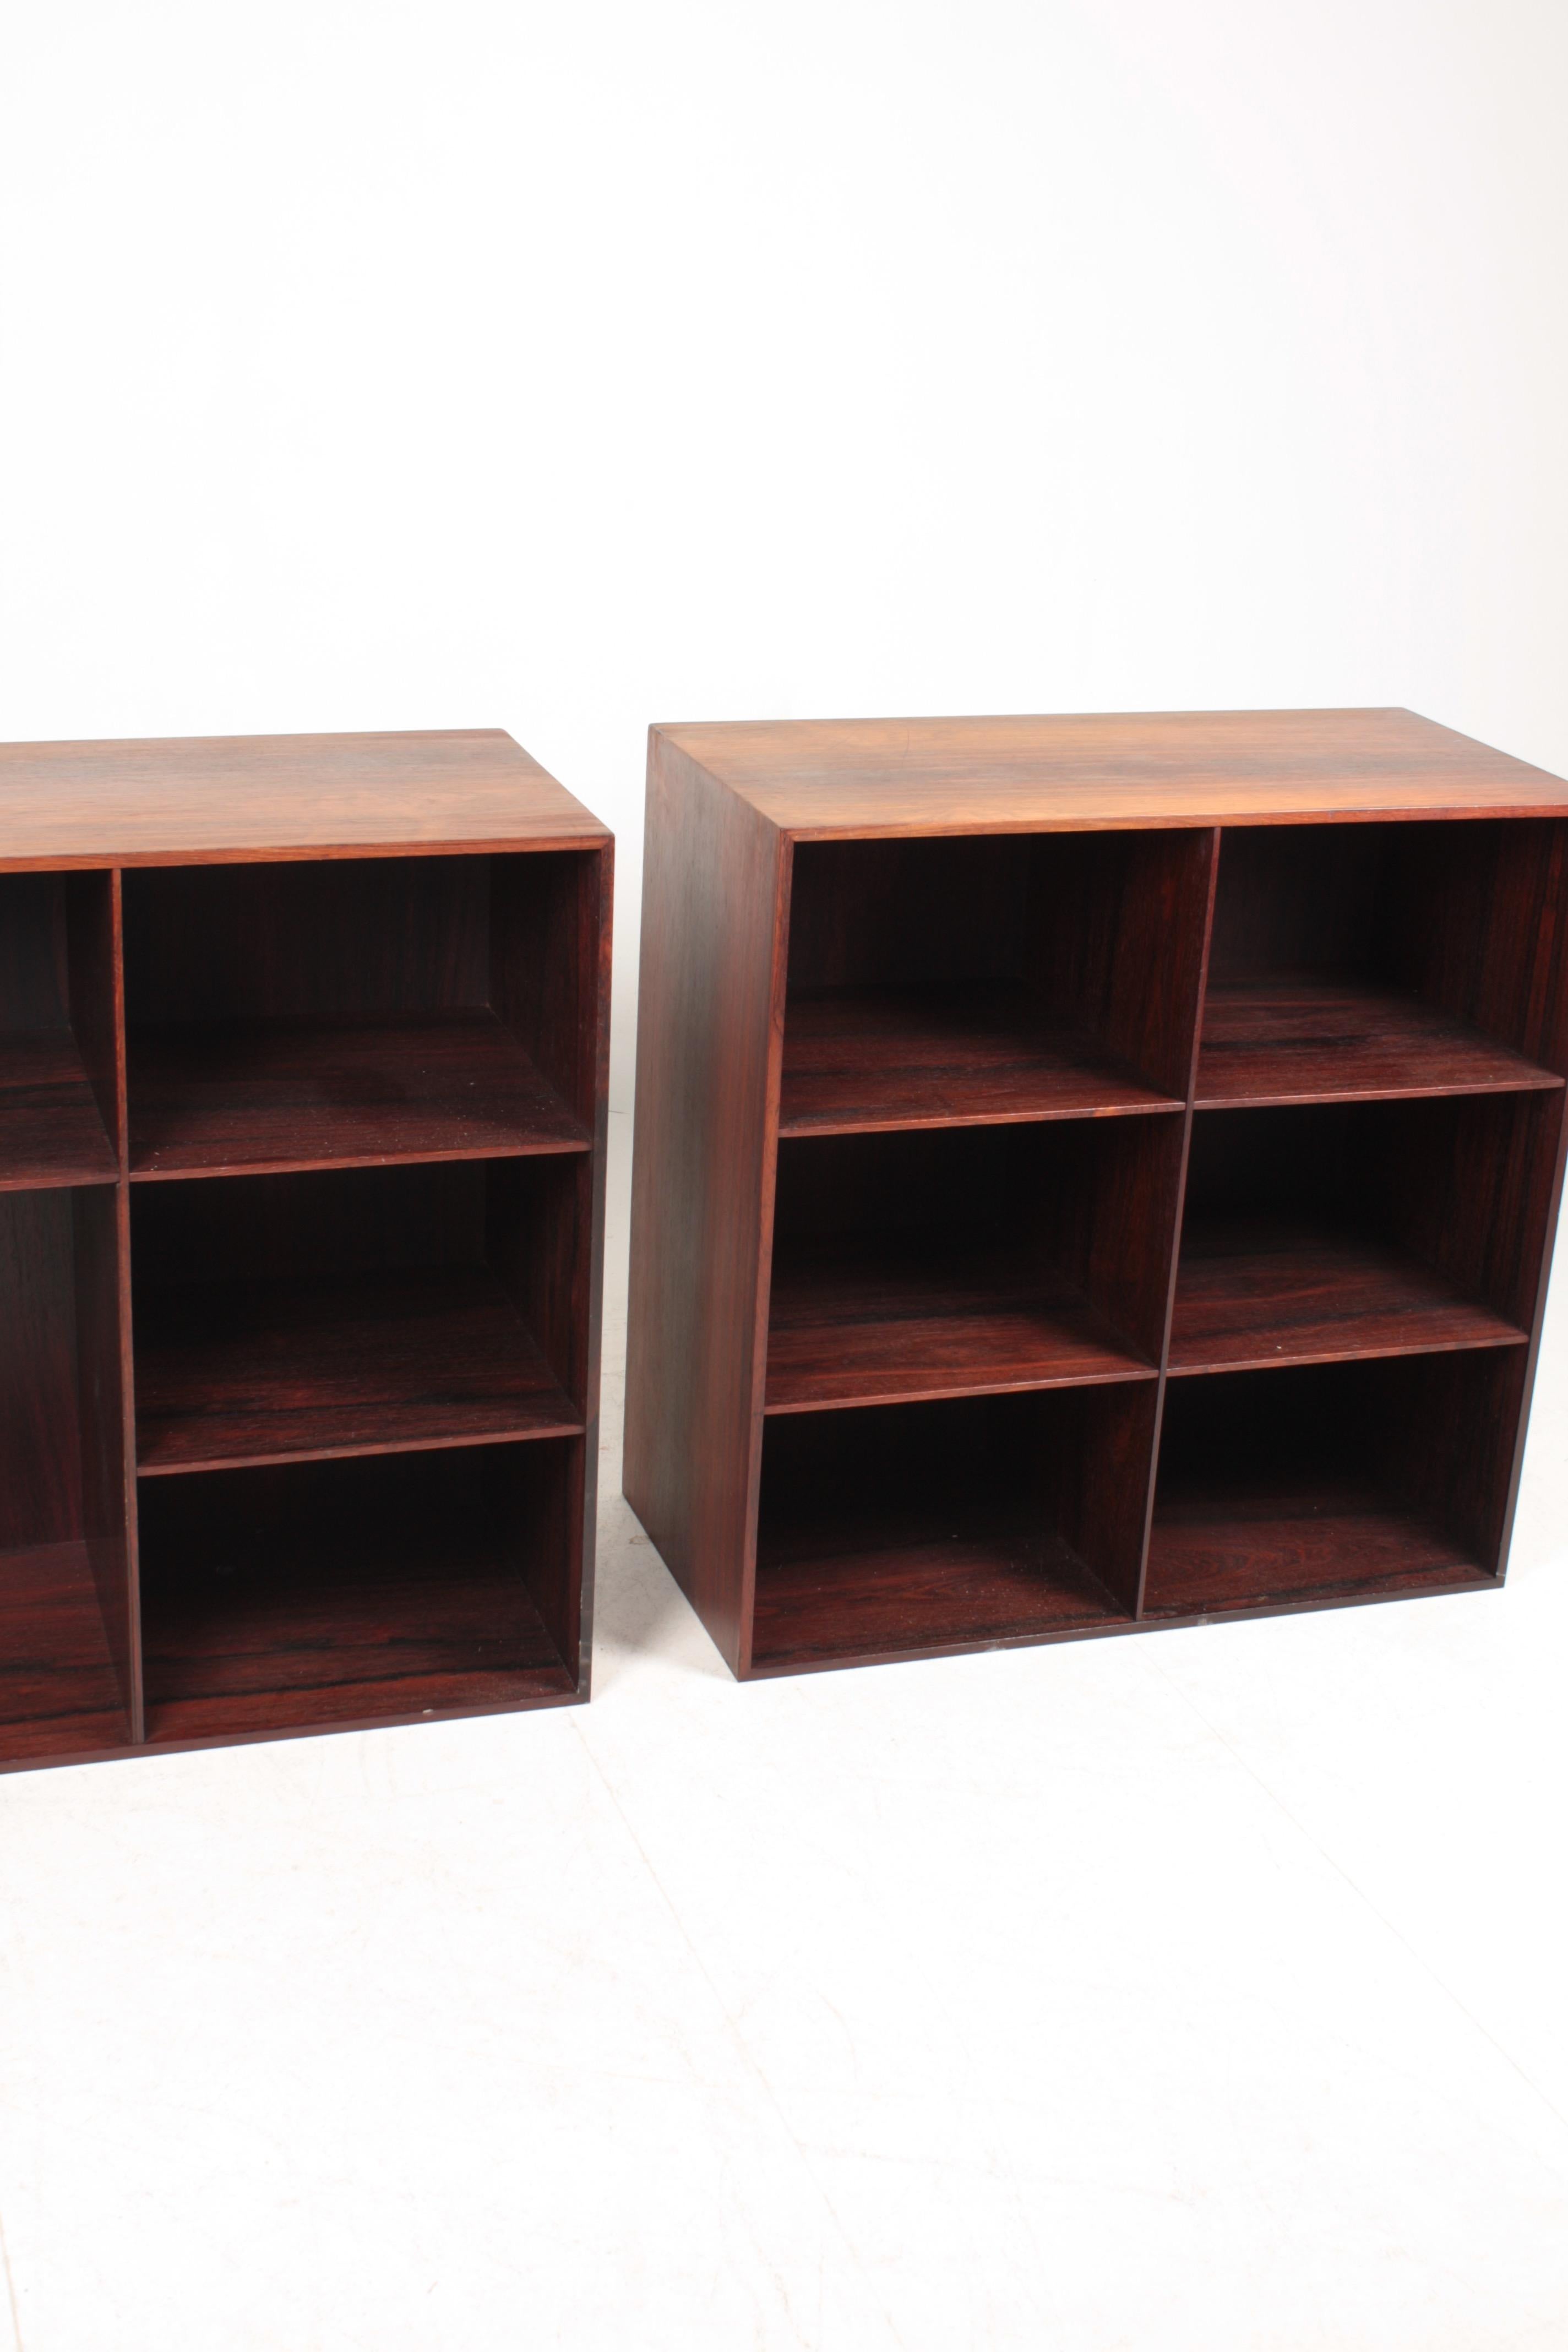 Pair bookcases in rosewood designed by Mogens Koch.

Provenance: Specially designed for the silversmith F. Hingelberg's showroom in Aarhus, Denmark.